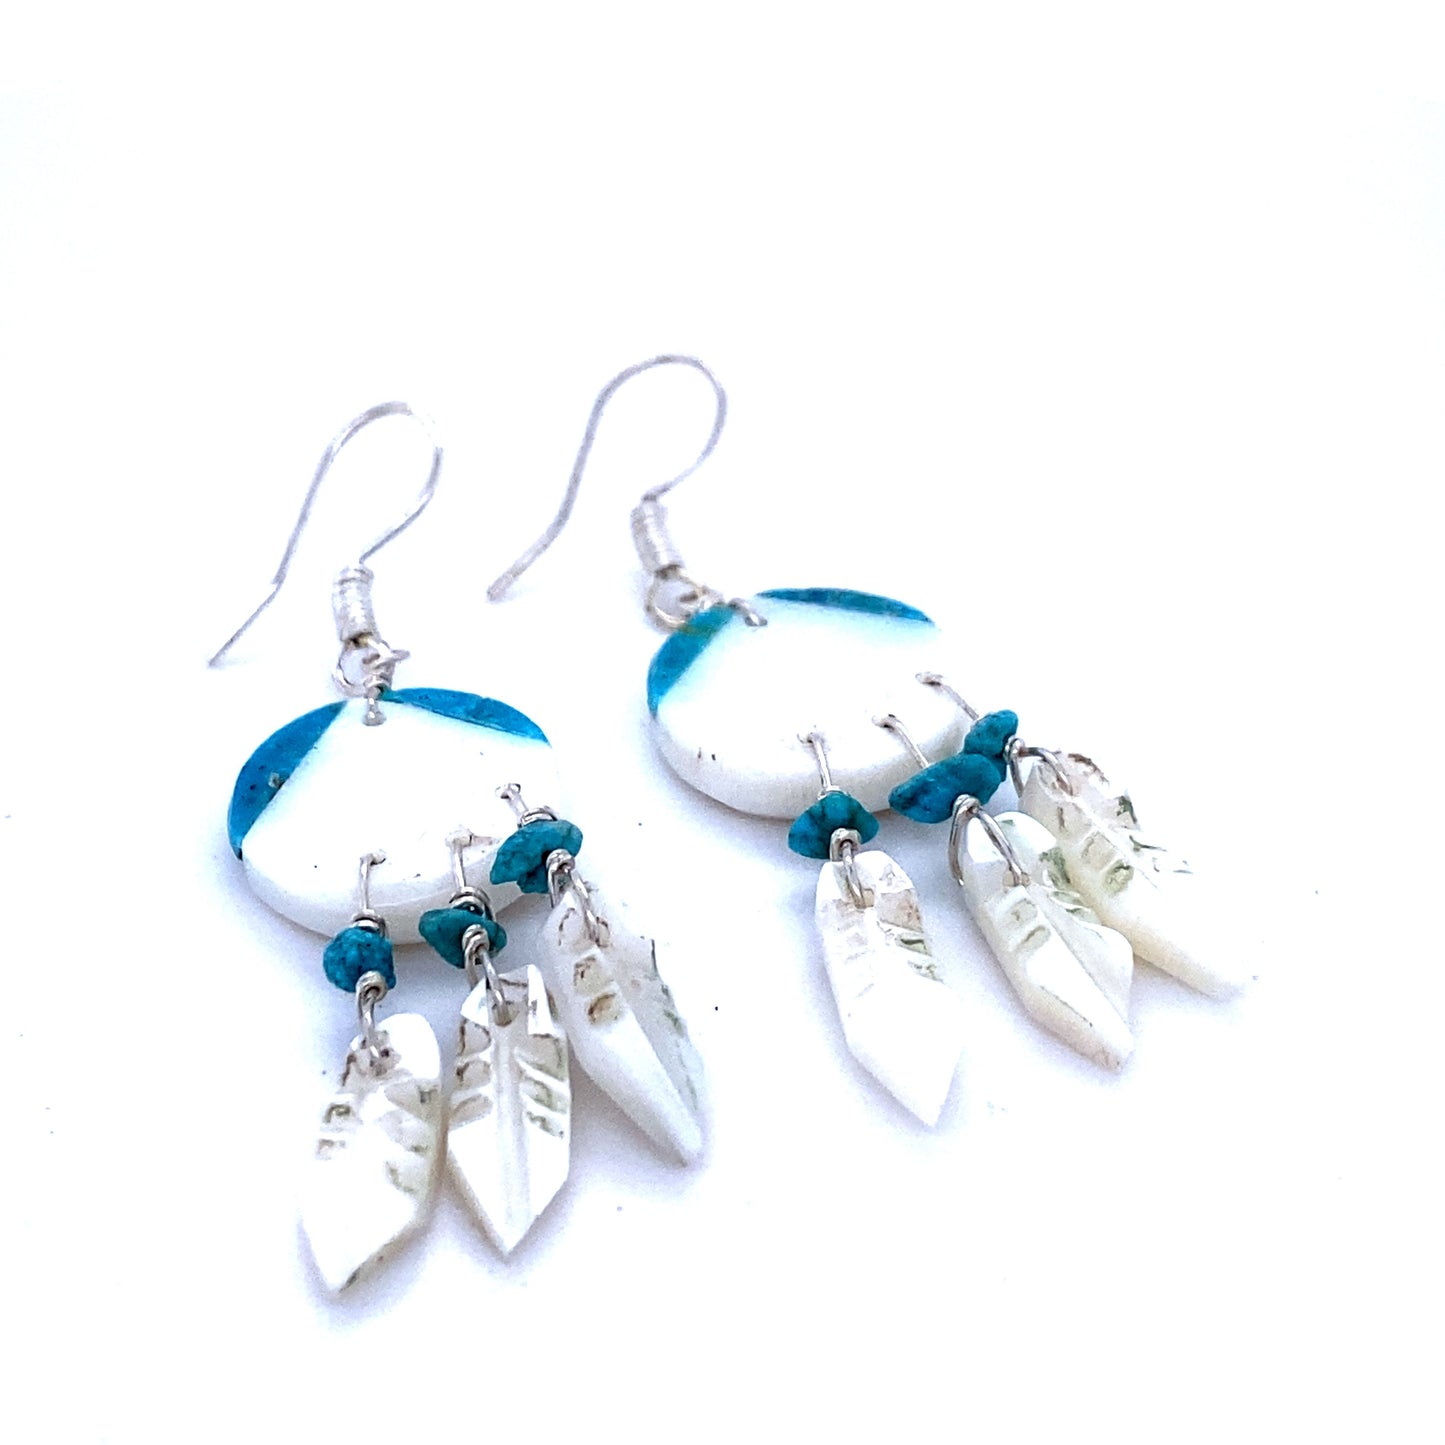 
                  
                    A pair of Handmade Earrings with 3 Small Stone Feathers inspired by Native American culture, made by Super Silver.
                  
                